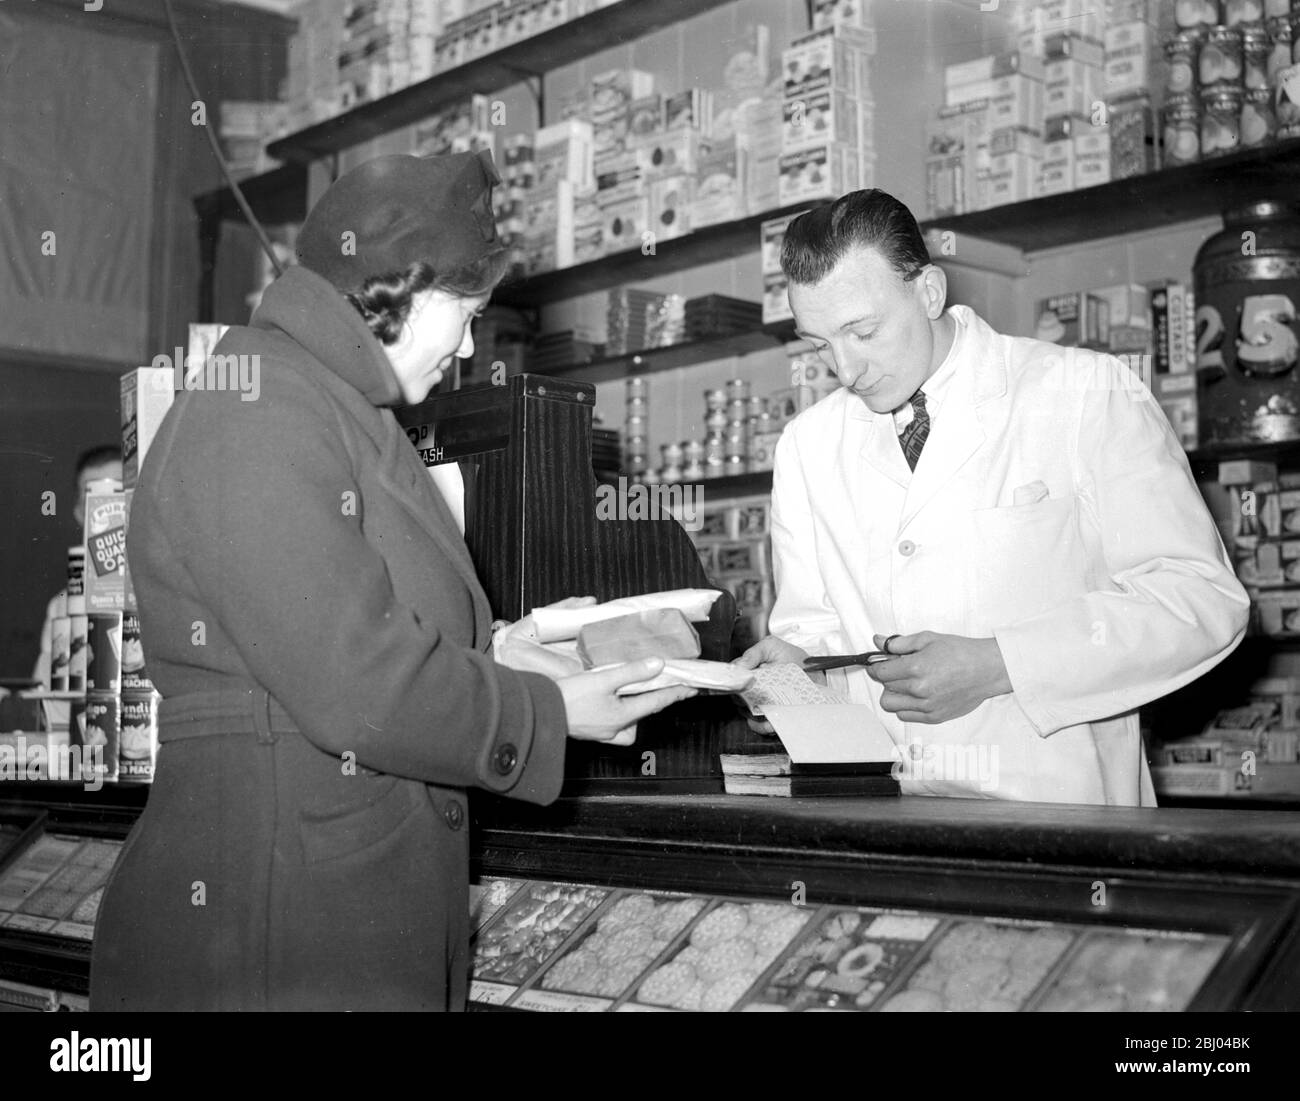 War 1939-1940. - Rationing - cutting out the coupons for sugar at the grocer's. - 8 January 1940 Stock Photo